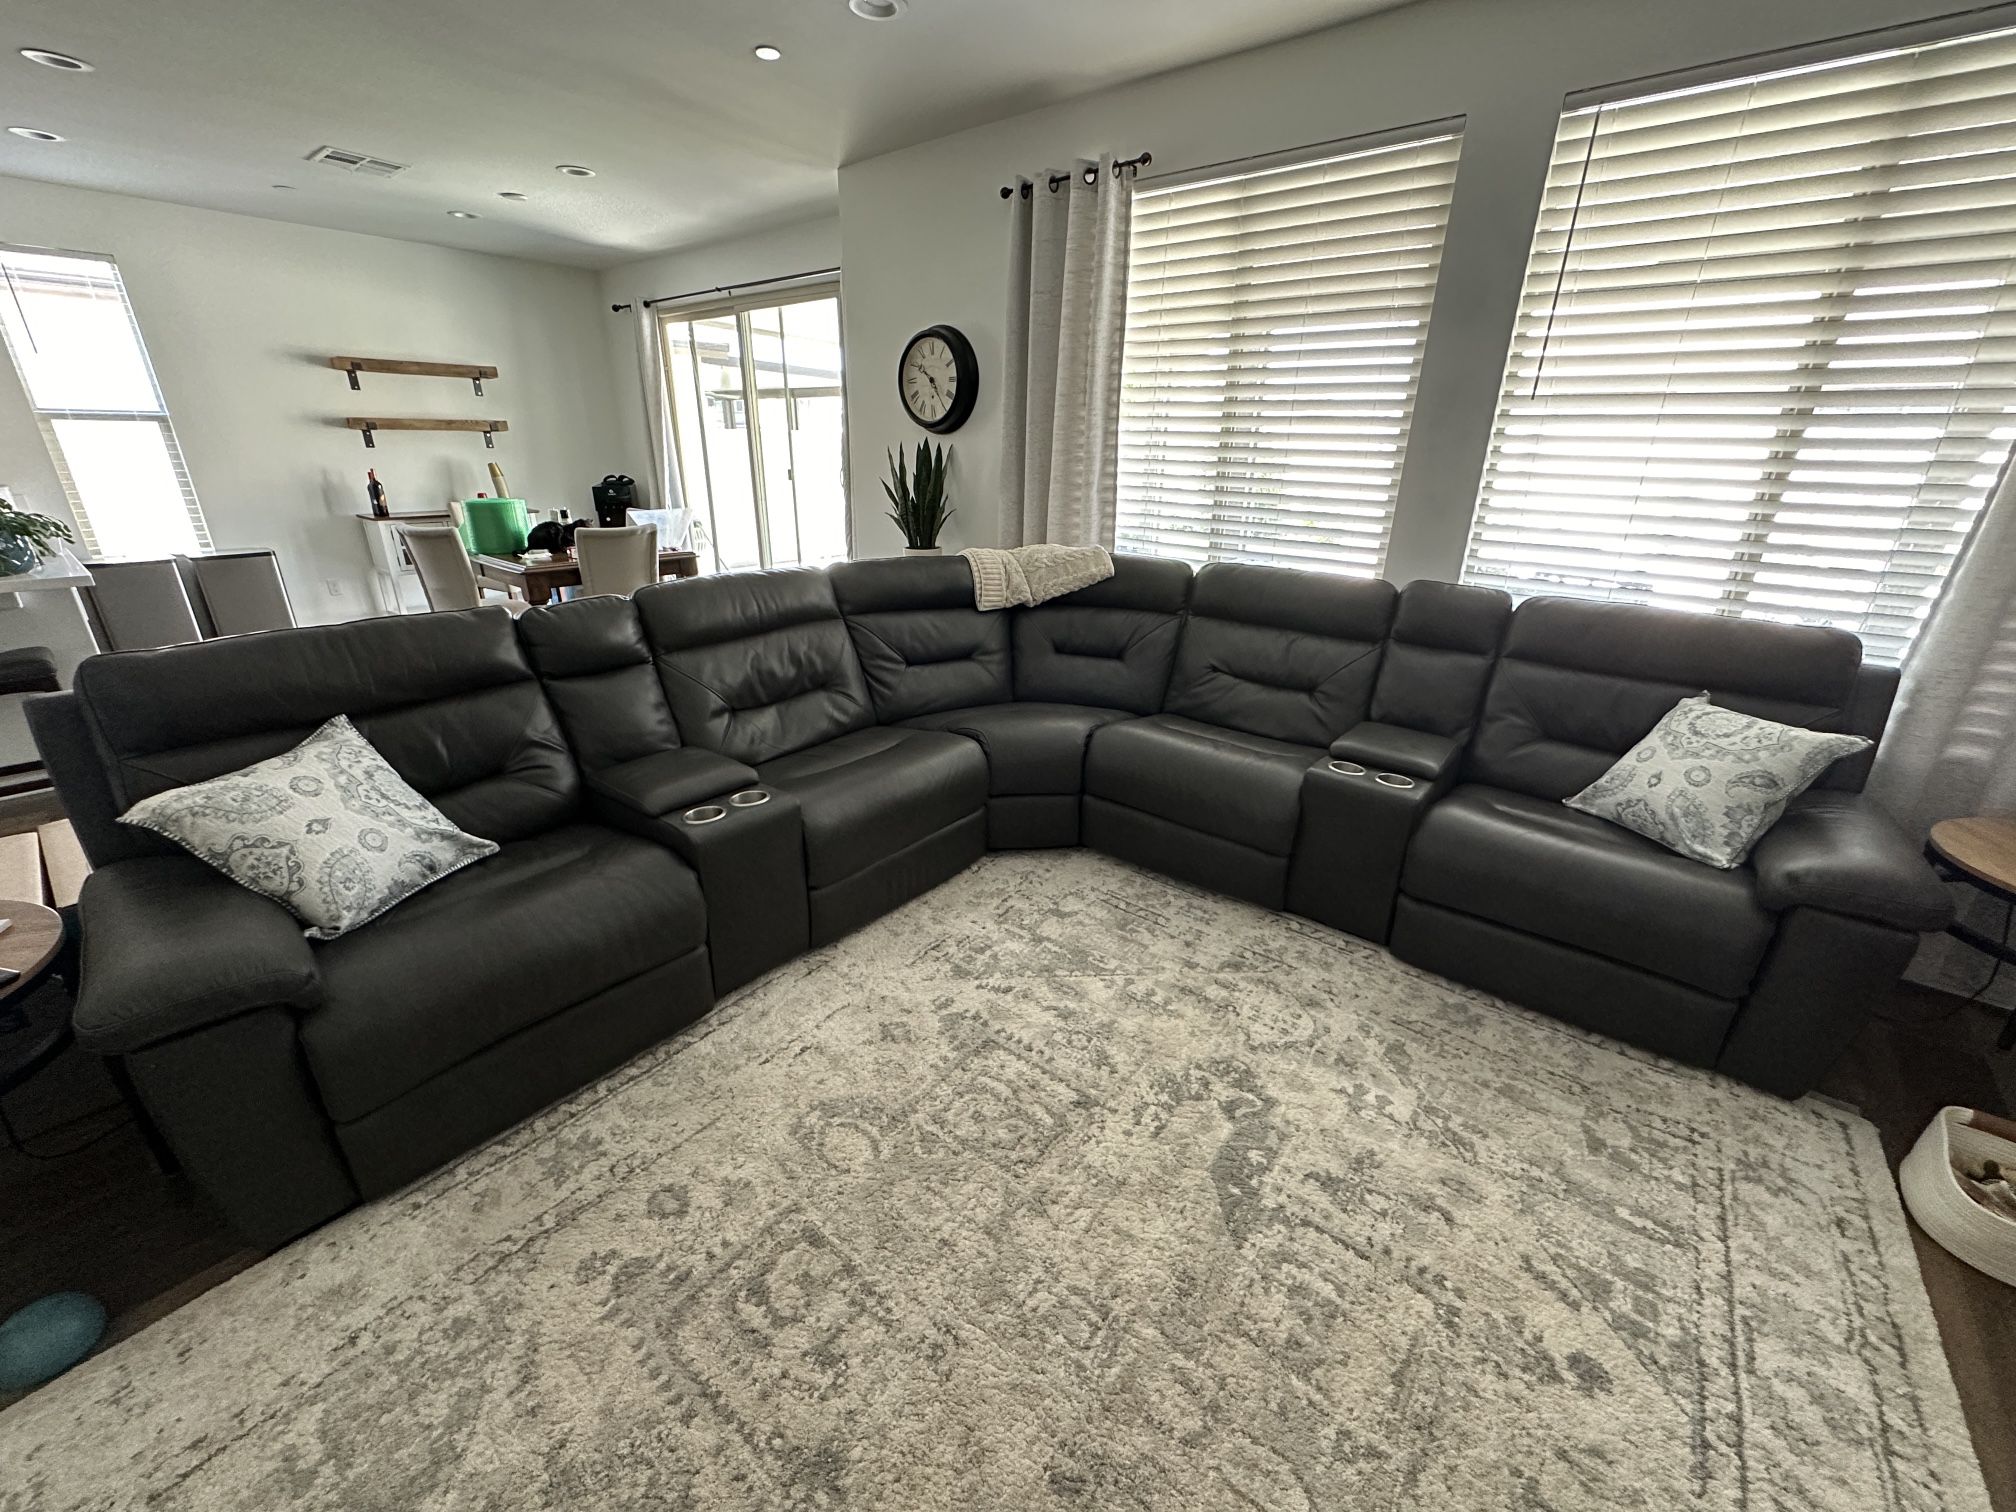 Leather recliner 7 piece sectional with power headrest